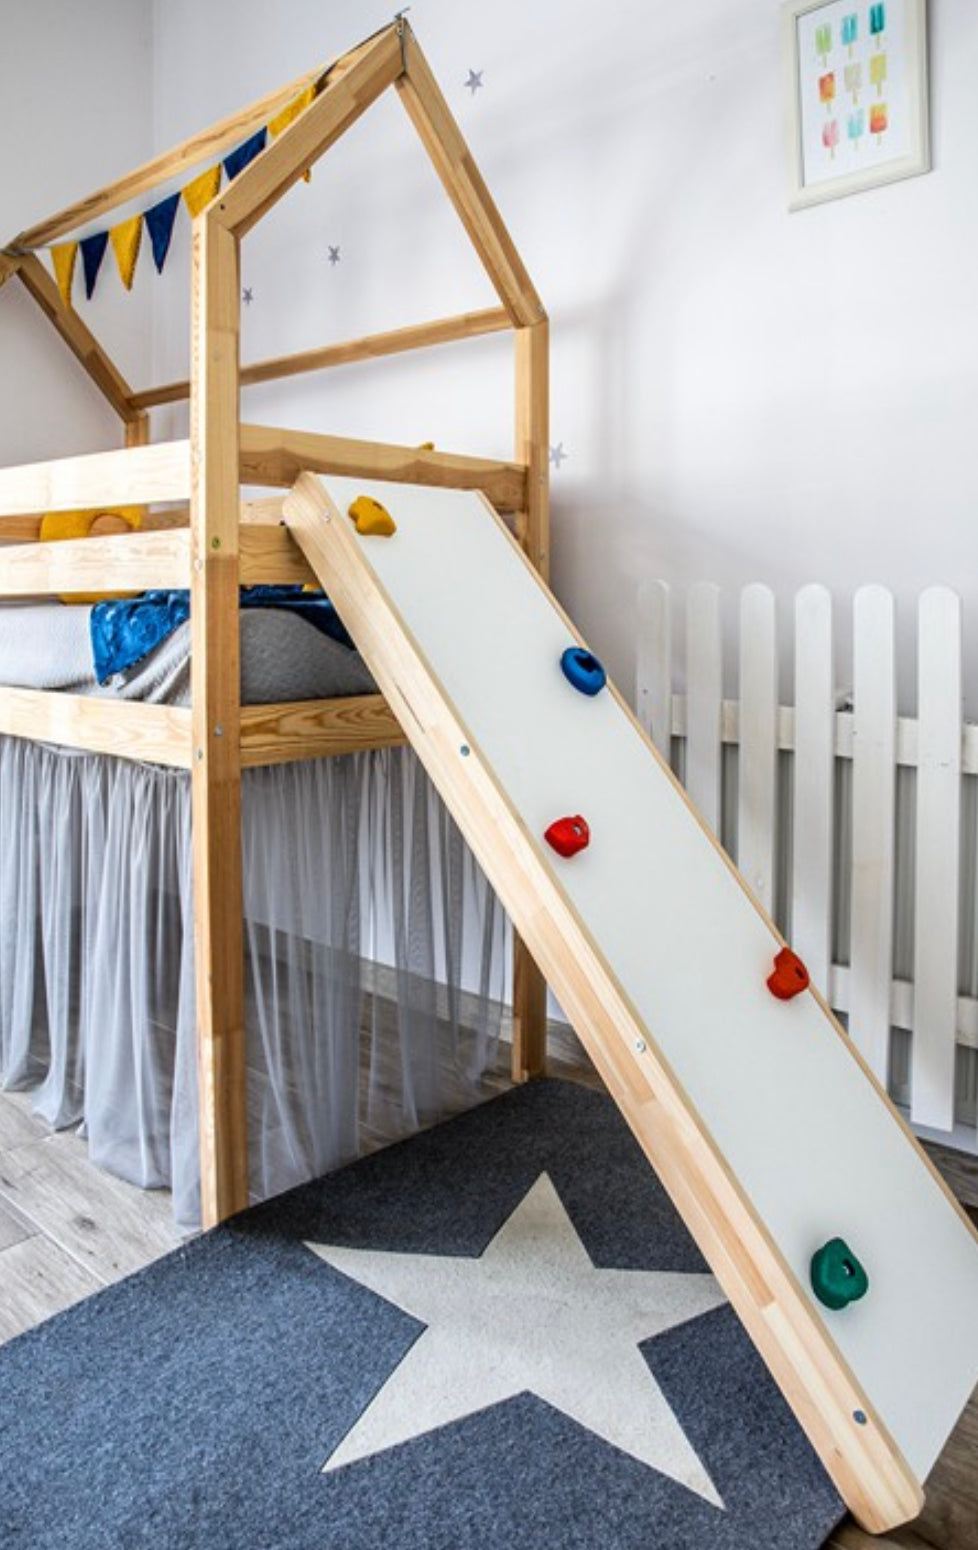 House Bed with Climbing Wall